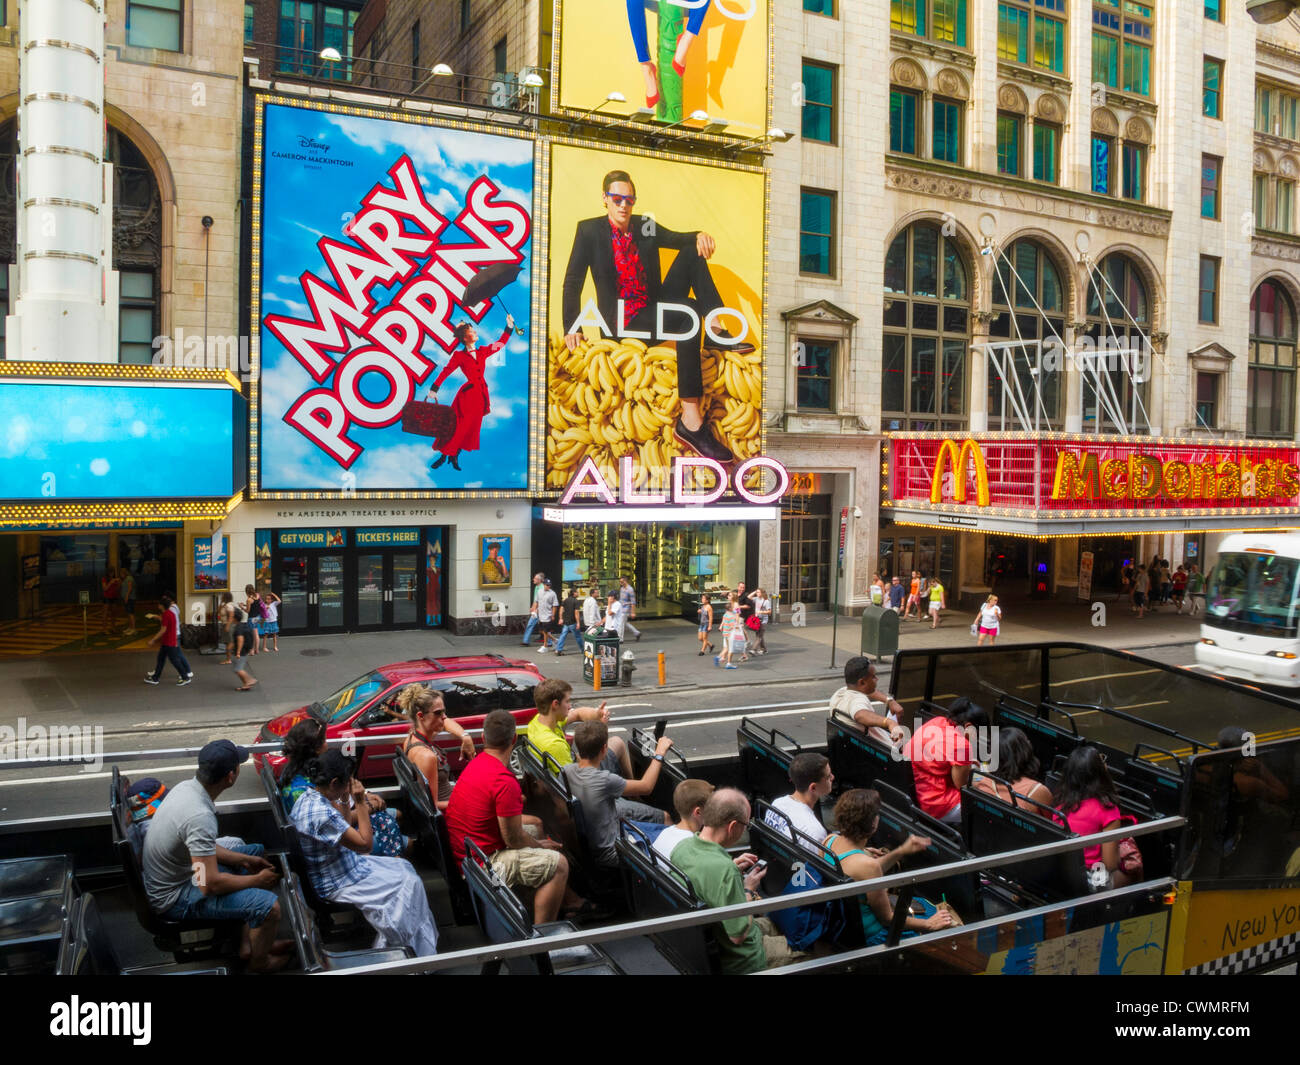 Tour Bus, tourists and Broadway Show Marquees, 42nd Street, NYC Stock Photo